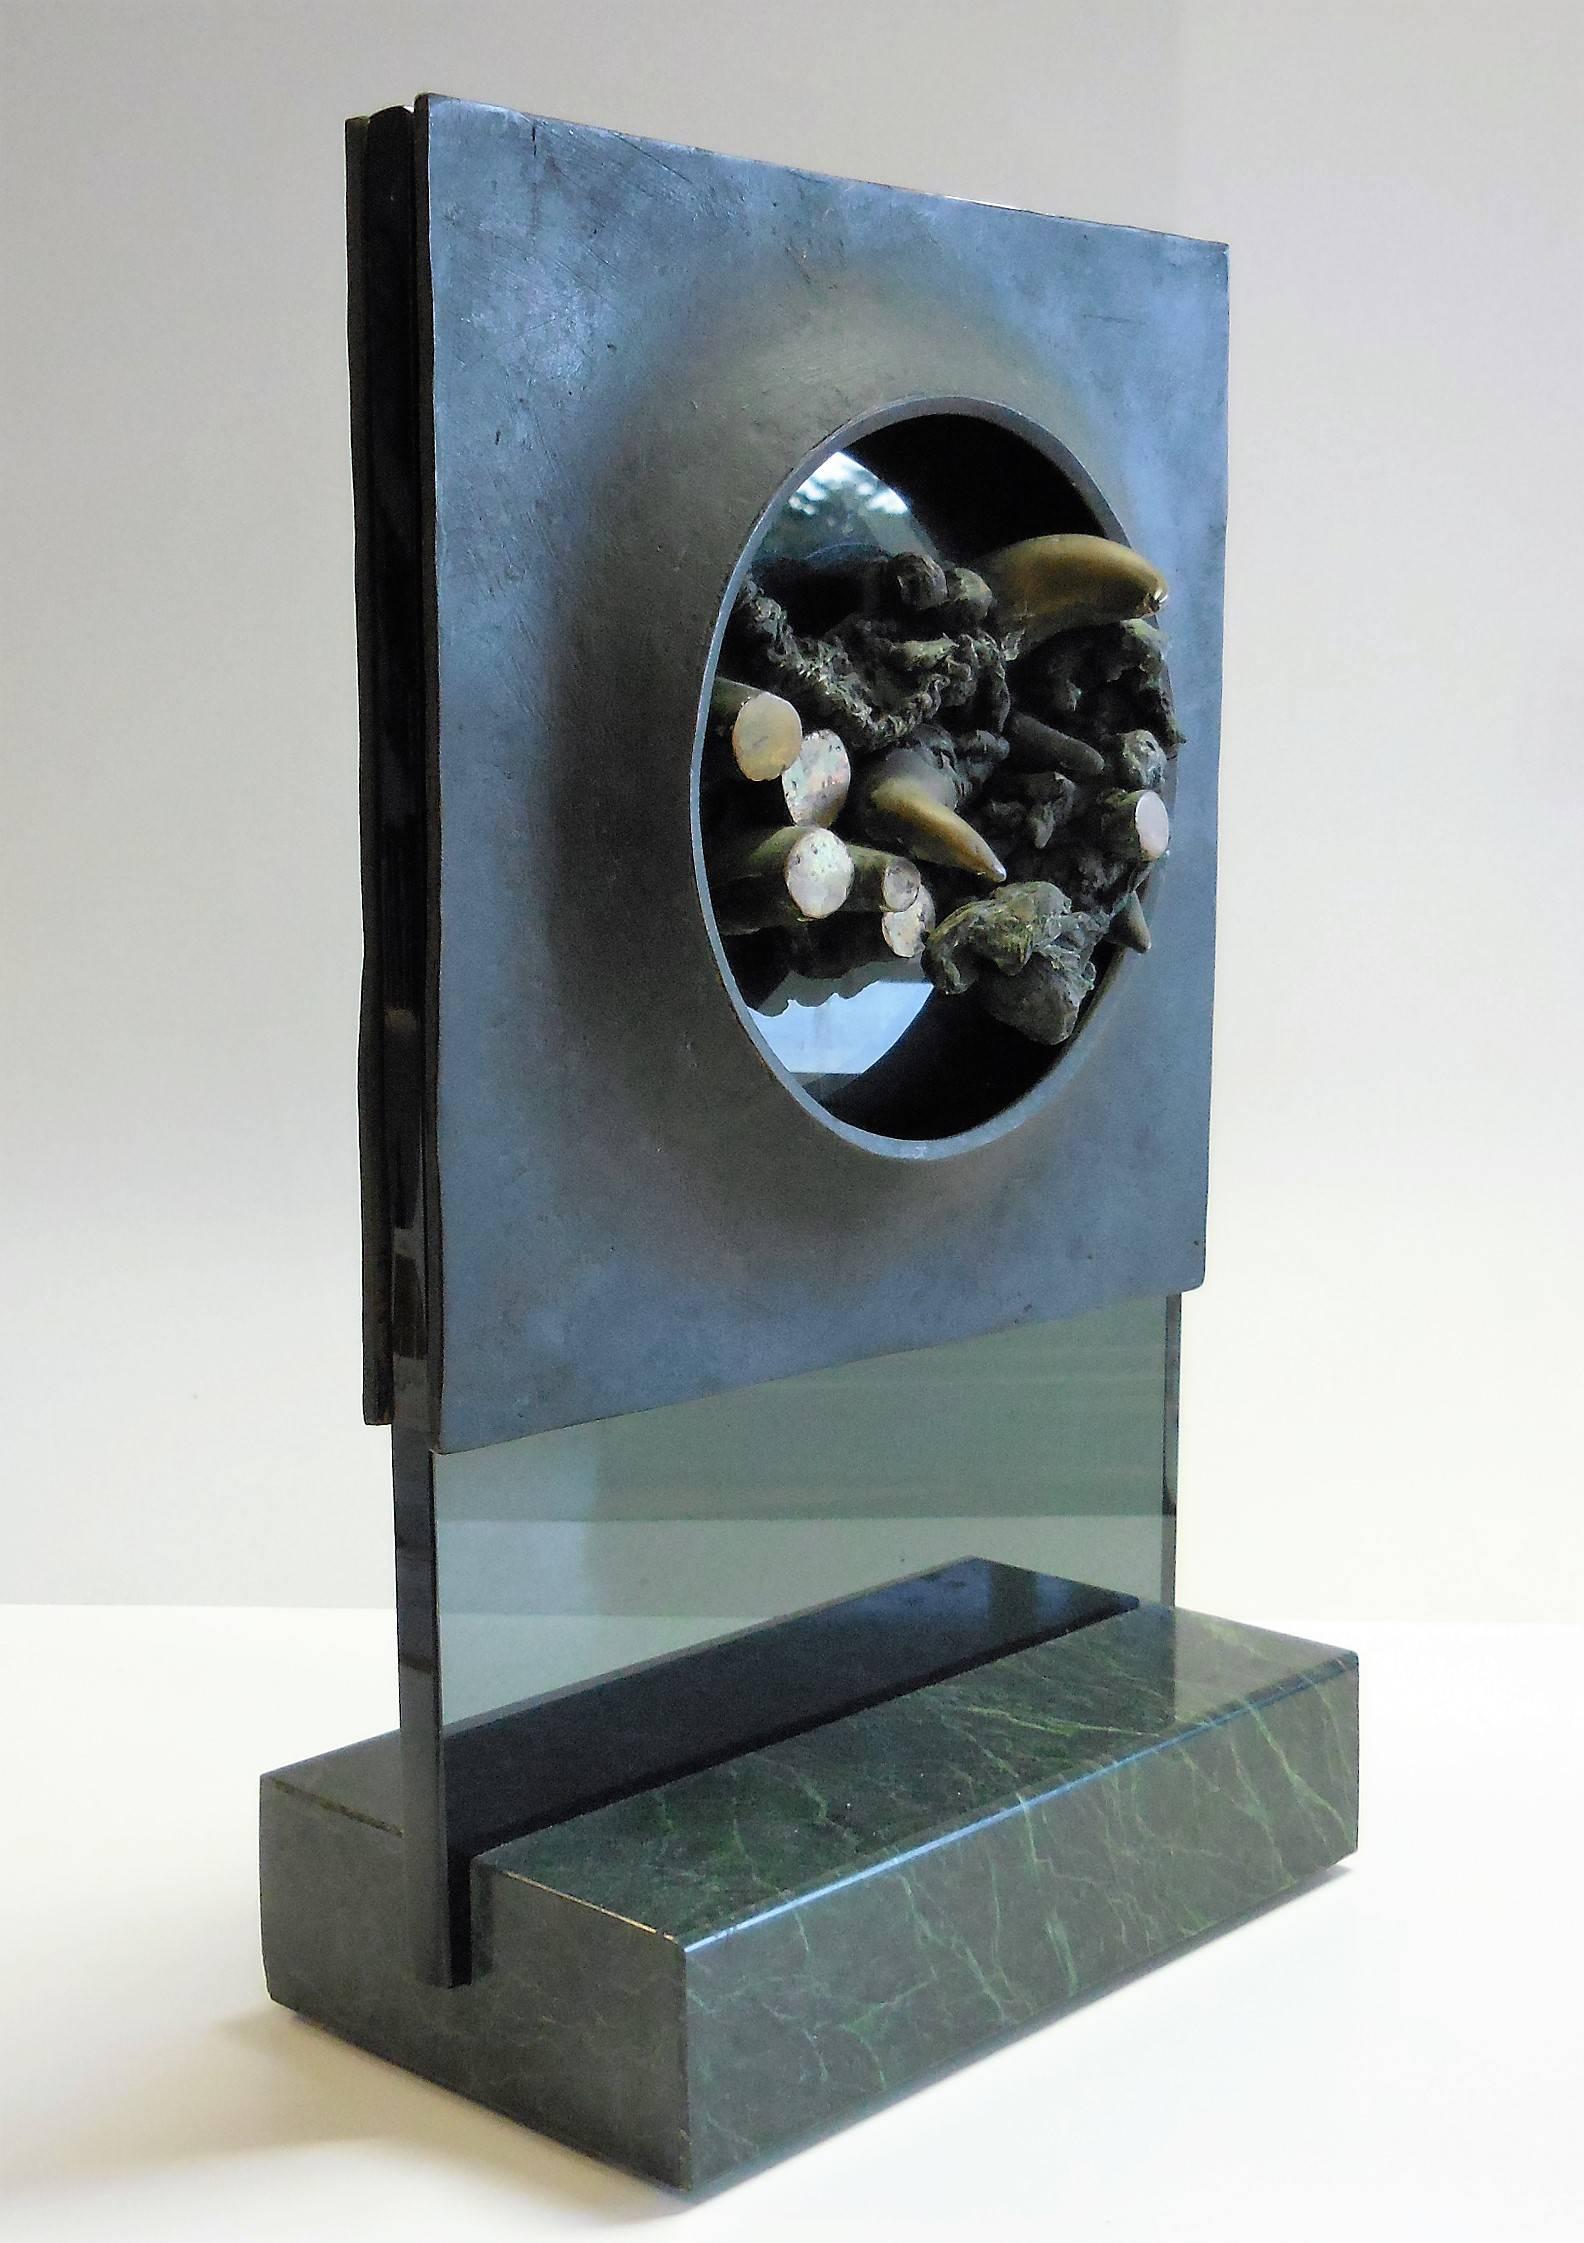 A unique sculpture by artist Dean Meeker. The sculpture has two sides that although very similar offer subtle differences. Both sides have heavy bronze portholes mounted on smoked glass that offer a view of multiple bronze elements. The unusual